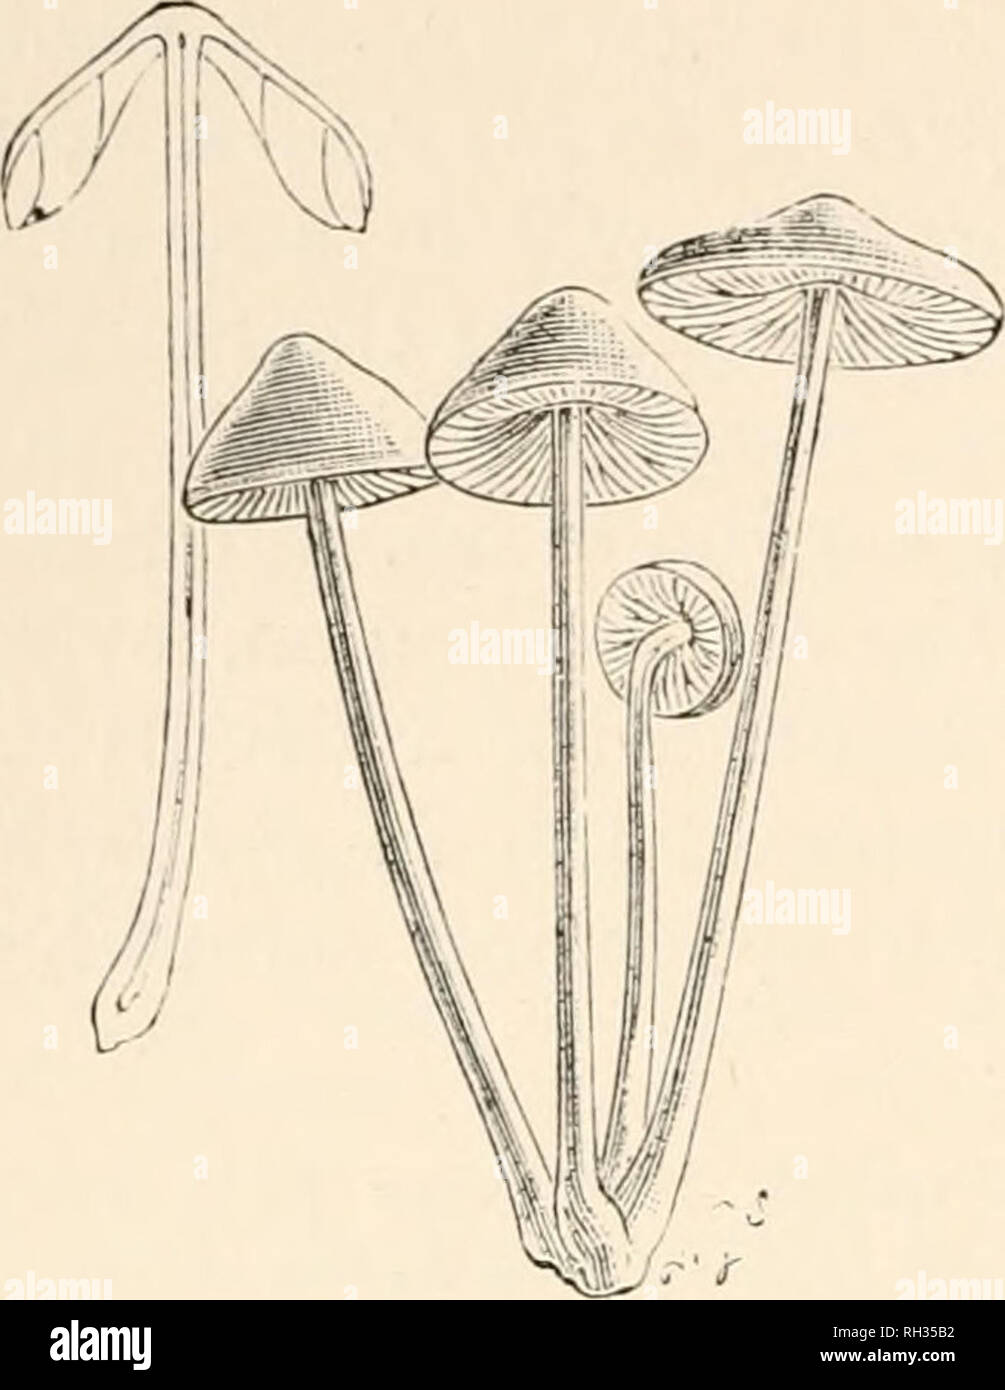 . British fungi (hymenomycetes). Basidiomycetes; Fungi -- Great Britain. I2O AGARICUS. Mycena. Subgenits VII. MYCENA (/ivxrjs, a fungus). Fr. Syst. Myc. i. p. 140. Stem fistulose, cartilaginous. Pileus somewhat mem- branaceous, more or less striate, at the first conico- or parabolico-cylindrical by reason of the margin being at the first straight, and either clasping the stem which is attenuated upwards, or pressed close and parallel to it. Gills not decurrent (or only uncinate by a small tooth). Epiphytal or rooted, slender, somewhat campanulate, scarce- ly umbilicate. Fr. Hyvi. Eur. p. 129.  Stock Photo